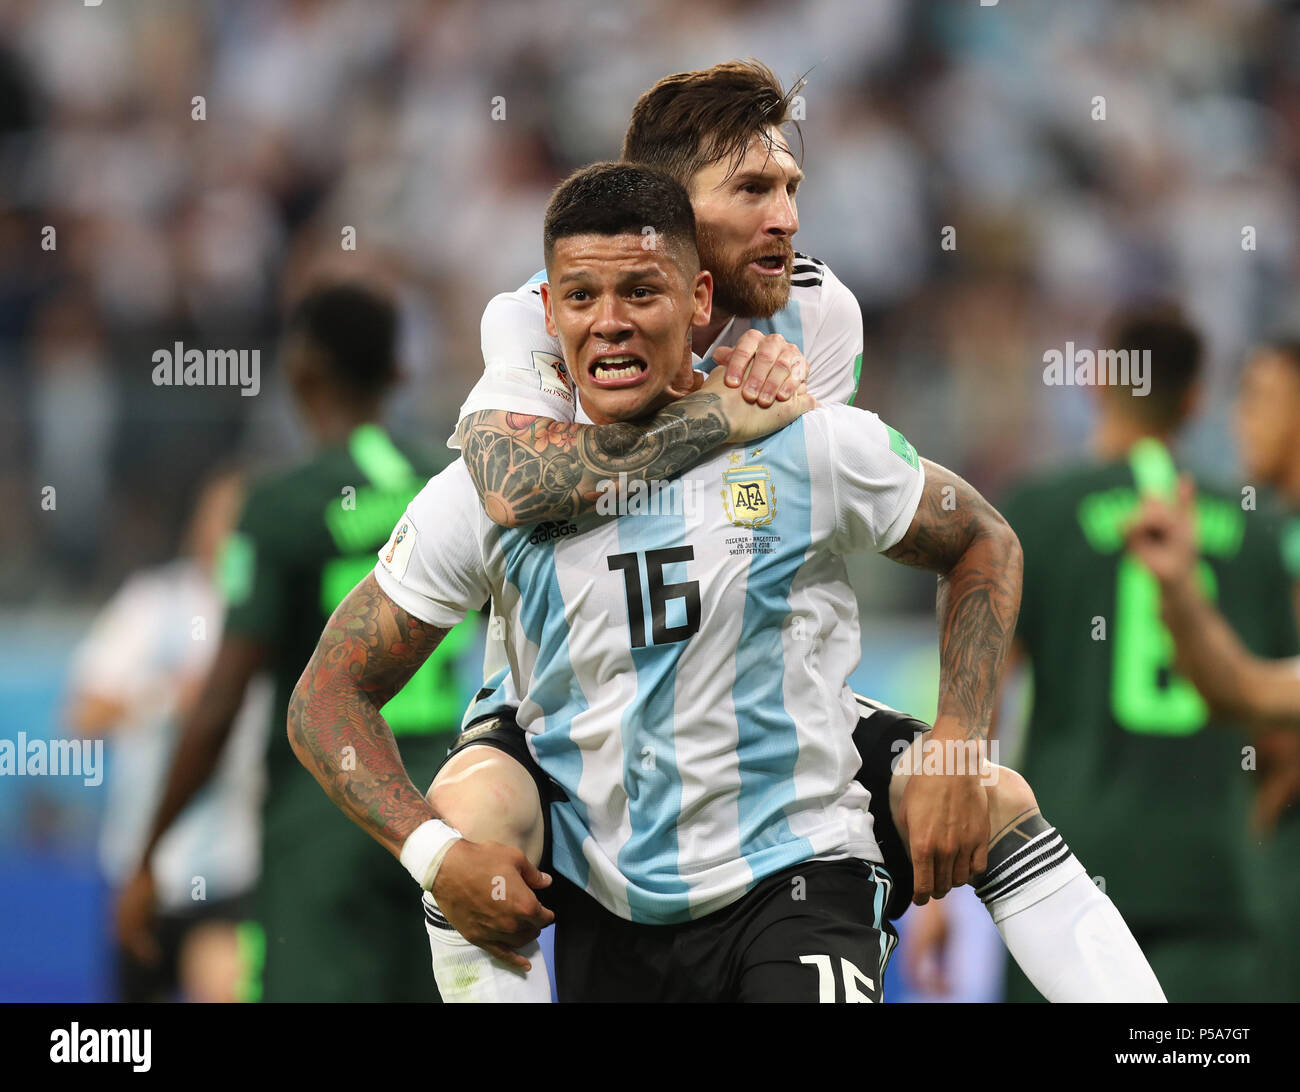 Saint Petersburg, Russia. 26th June, 2018. Argentina's Marcos Rojo (bottom) celebrates scoring with Lionel Messi during the 2018 FIFA World Cup Group D match between Nigeria and Argentina in Saint Petersburg, Russia, June 26, 2018. Credit: Yang Lei/Xinhua/Alamy Live News Stock Photo